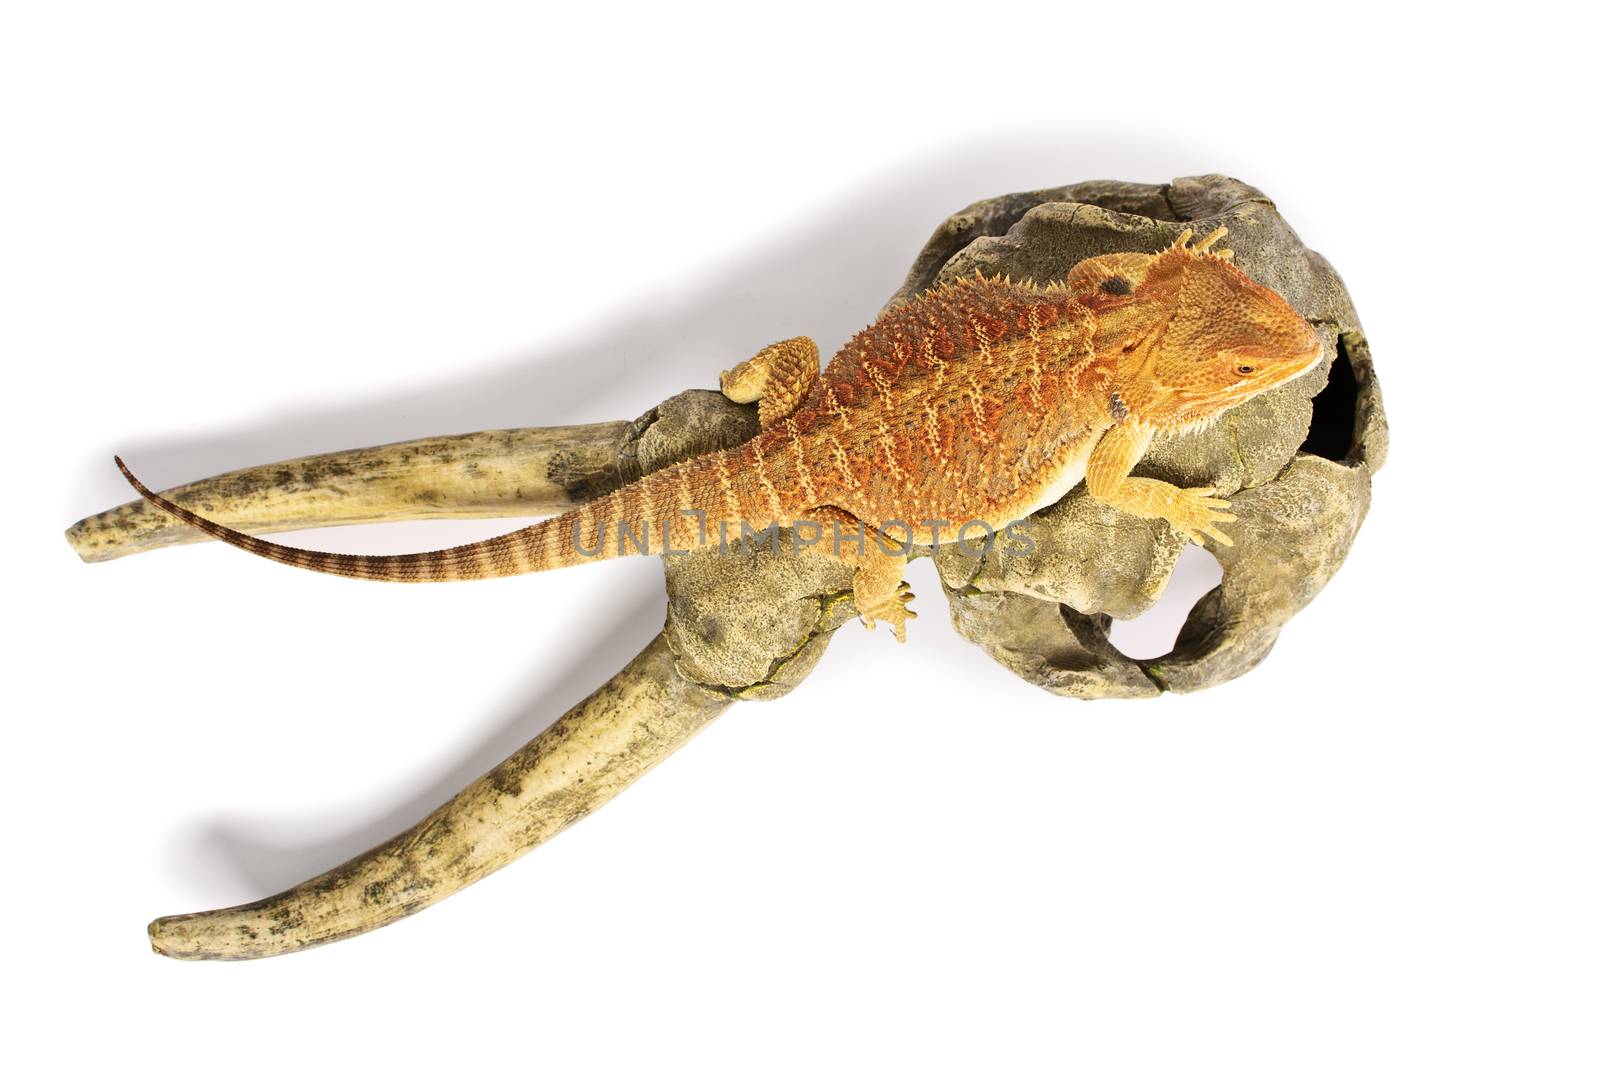 Top view of a vibrantly colored bearded dragon on horned animal skull. isolated on a white background.